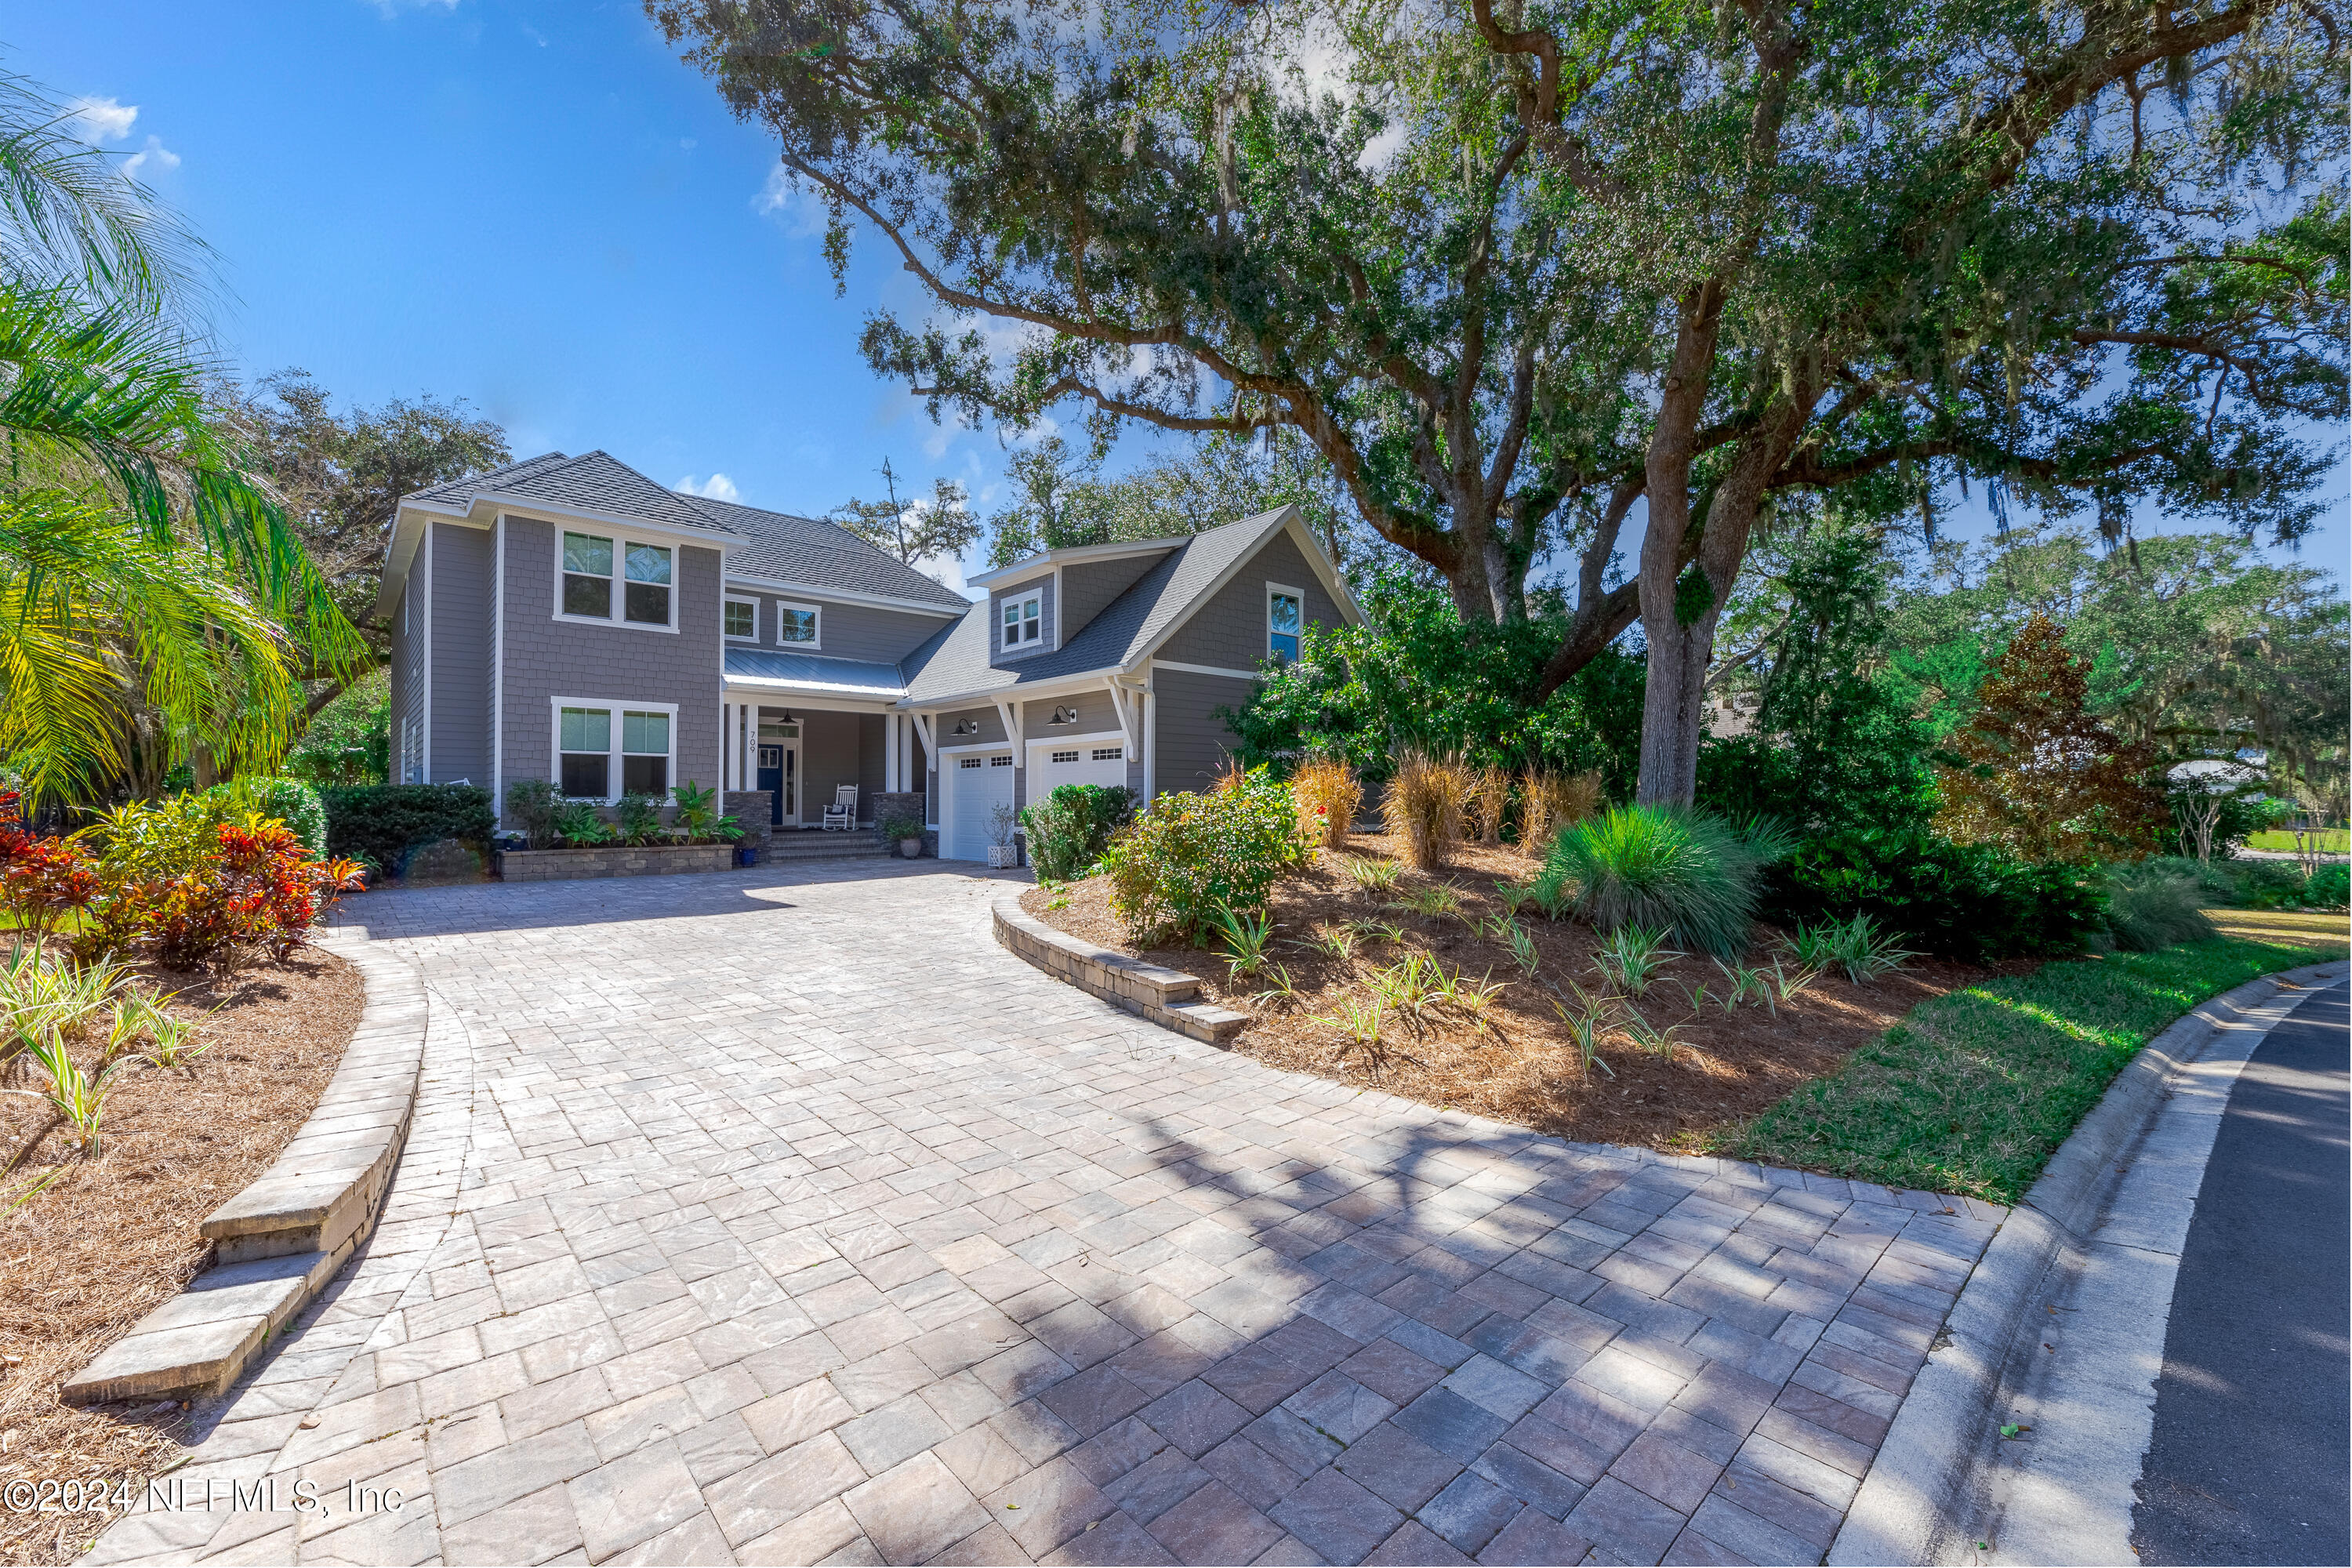 St Augustine, FL home for sale located at 709 OCEAN GATE Lane, St Augustine, FL 32080